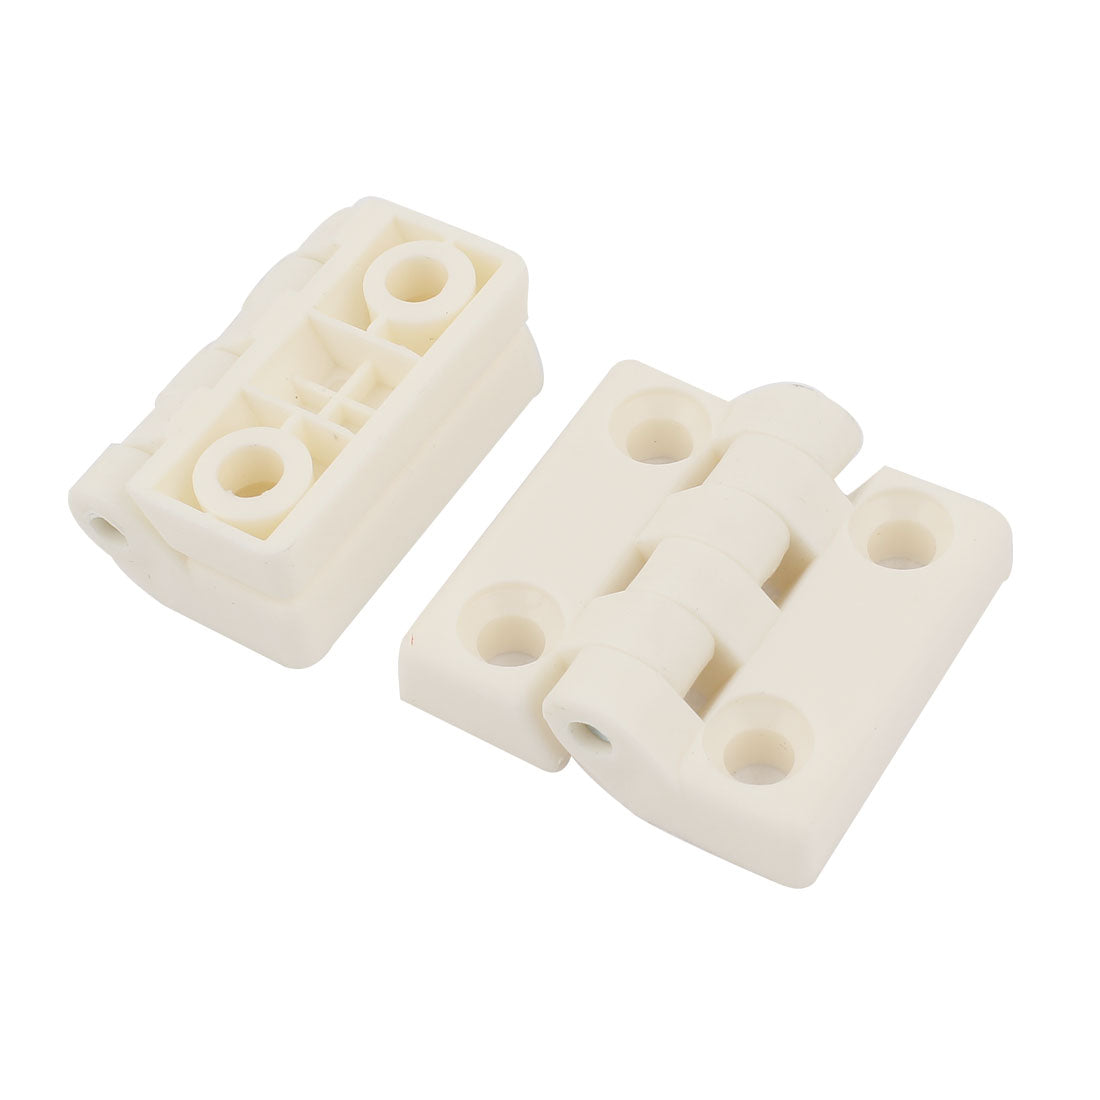 uxcell Uxcell 2pcs 48mm x 48mm Countersunk Hole Plastic Cabinet Ball Bearing Hinge White